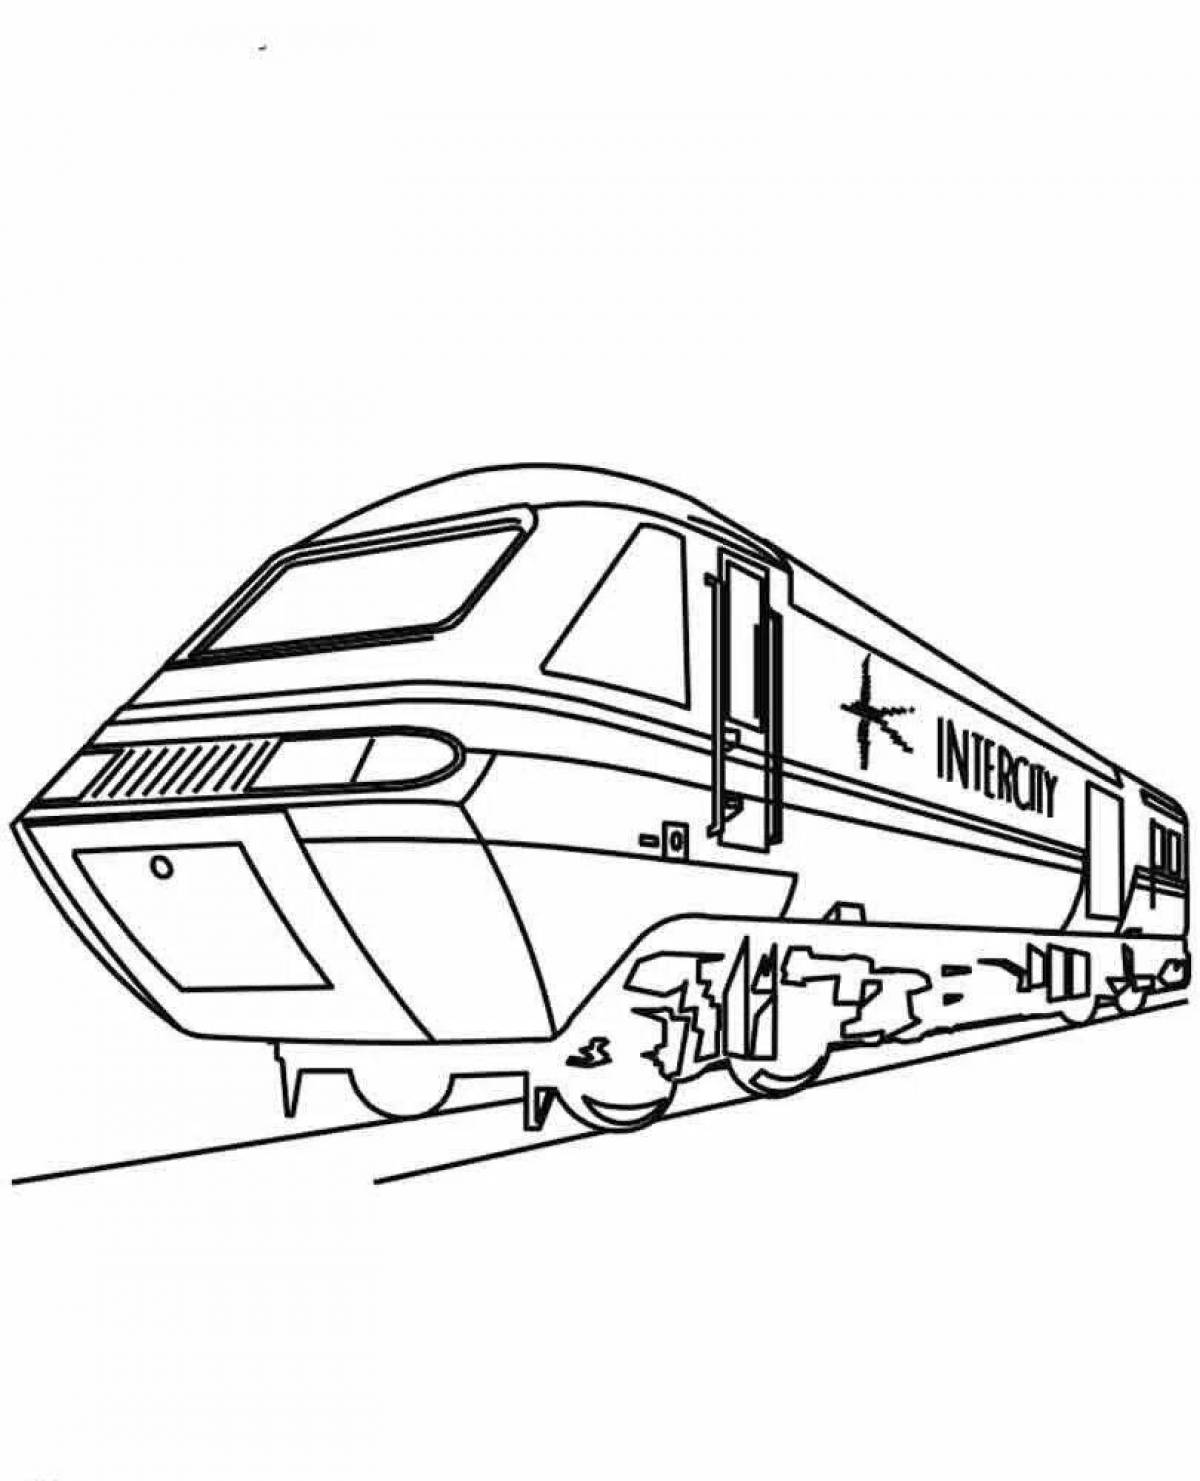 Coloring page for busy Russian trains